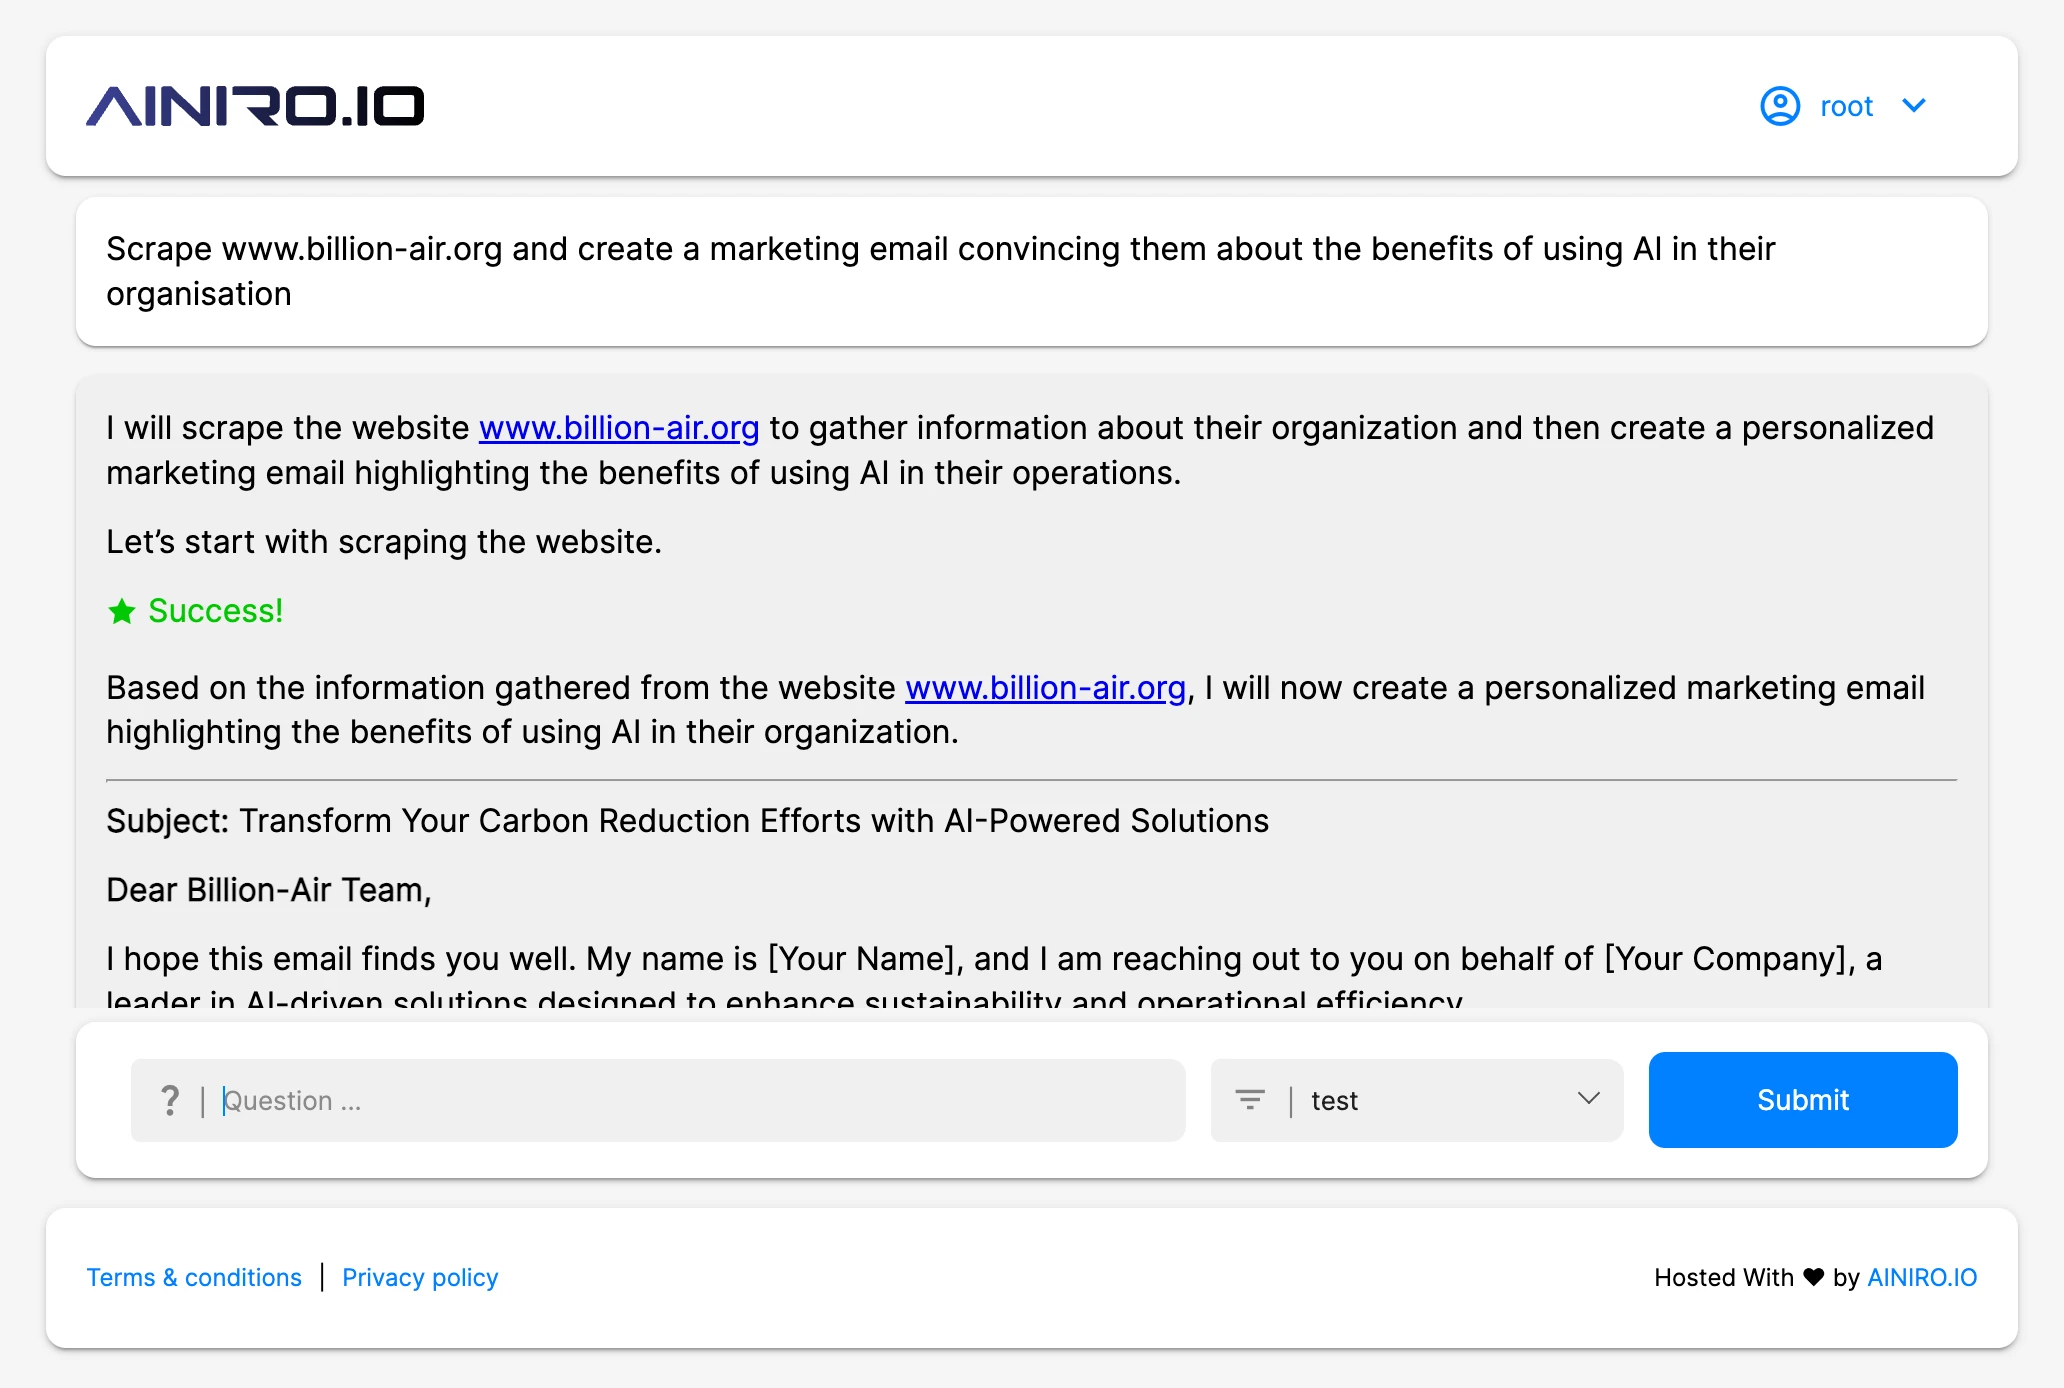 An AI Assistant creating a personalised marketing email by scraping a lead's website